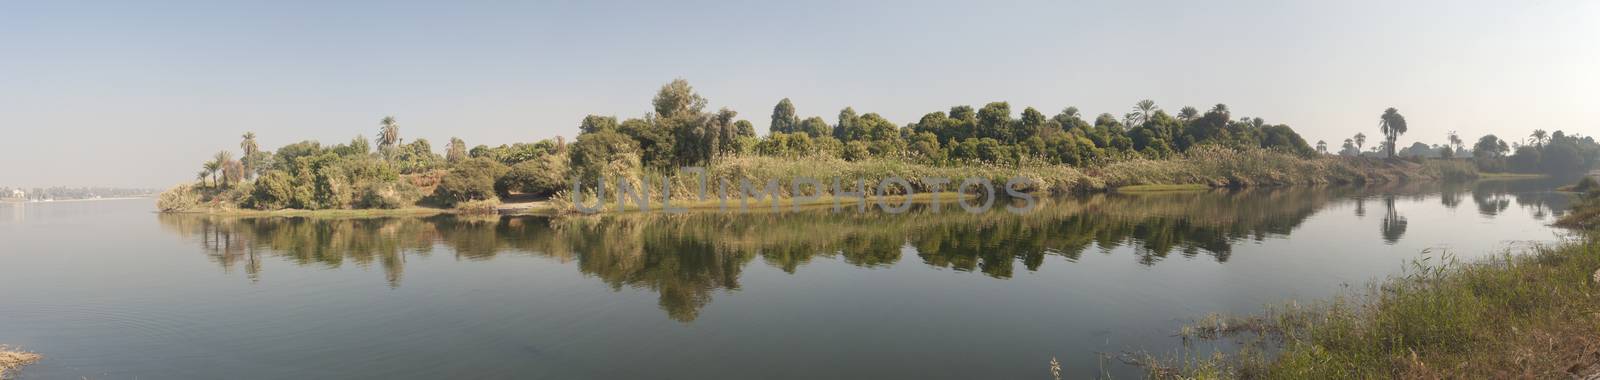 Vegetation along the banks of a large river with beautiful reflection and blue sky